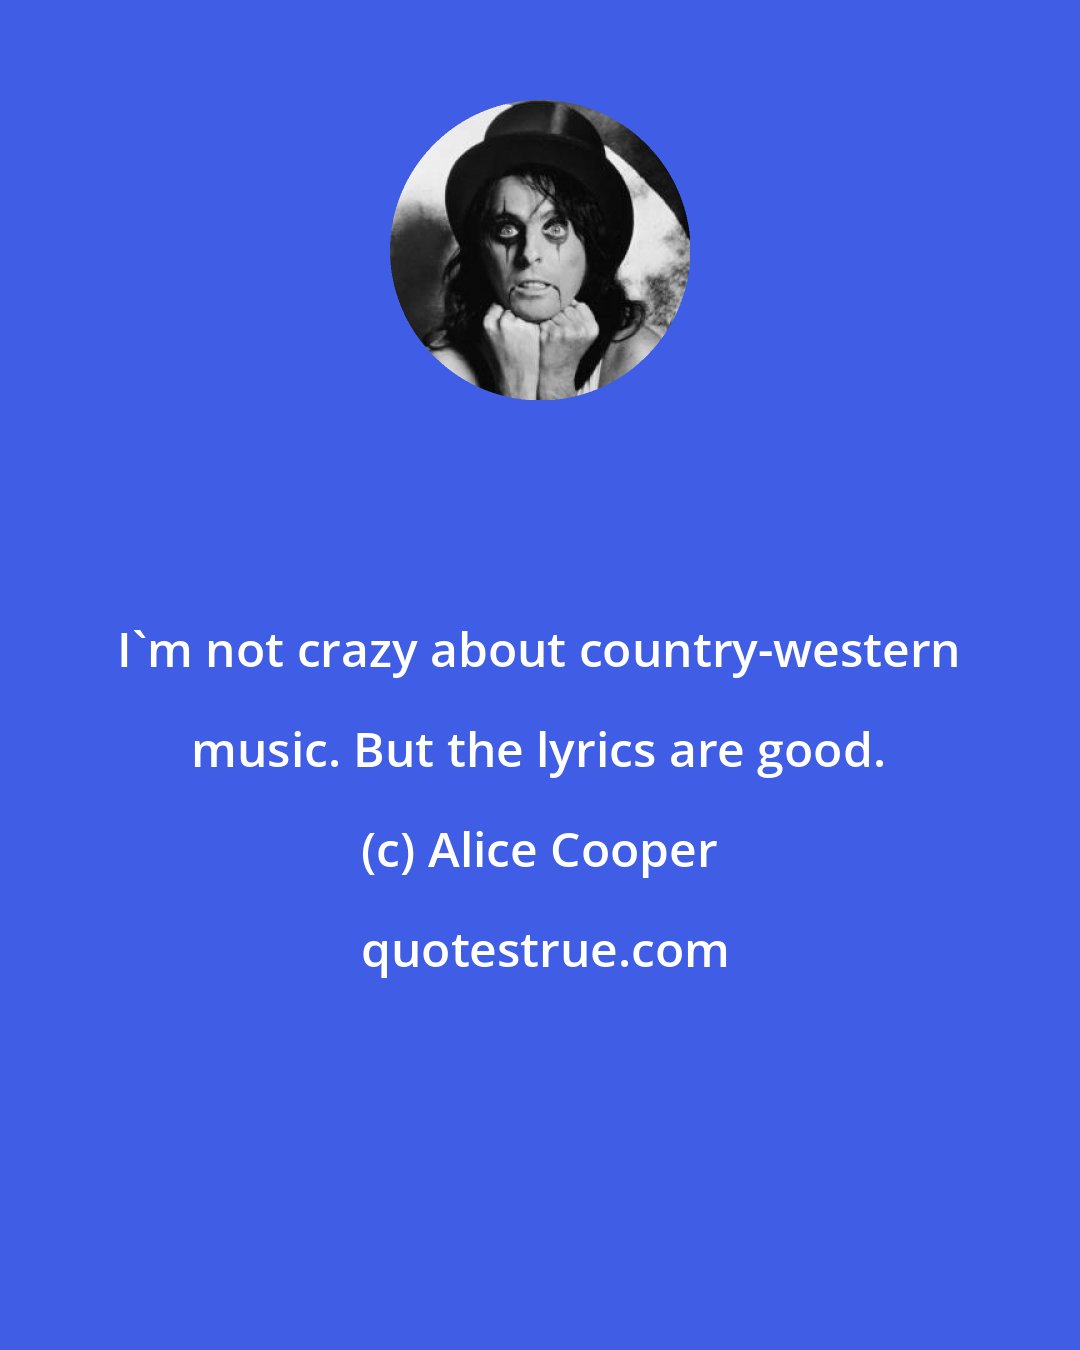 Alice Cooper: I'm not crazy about country-western music. But the lyrics are good.